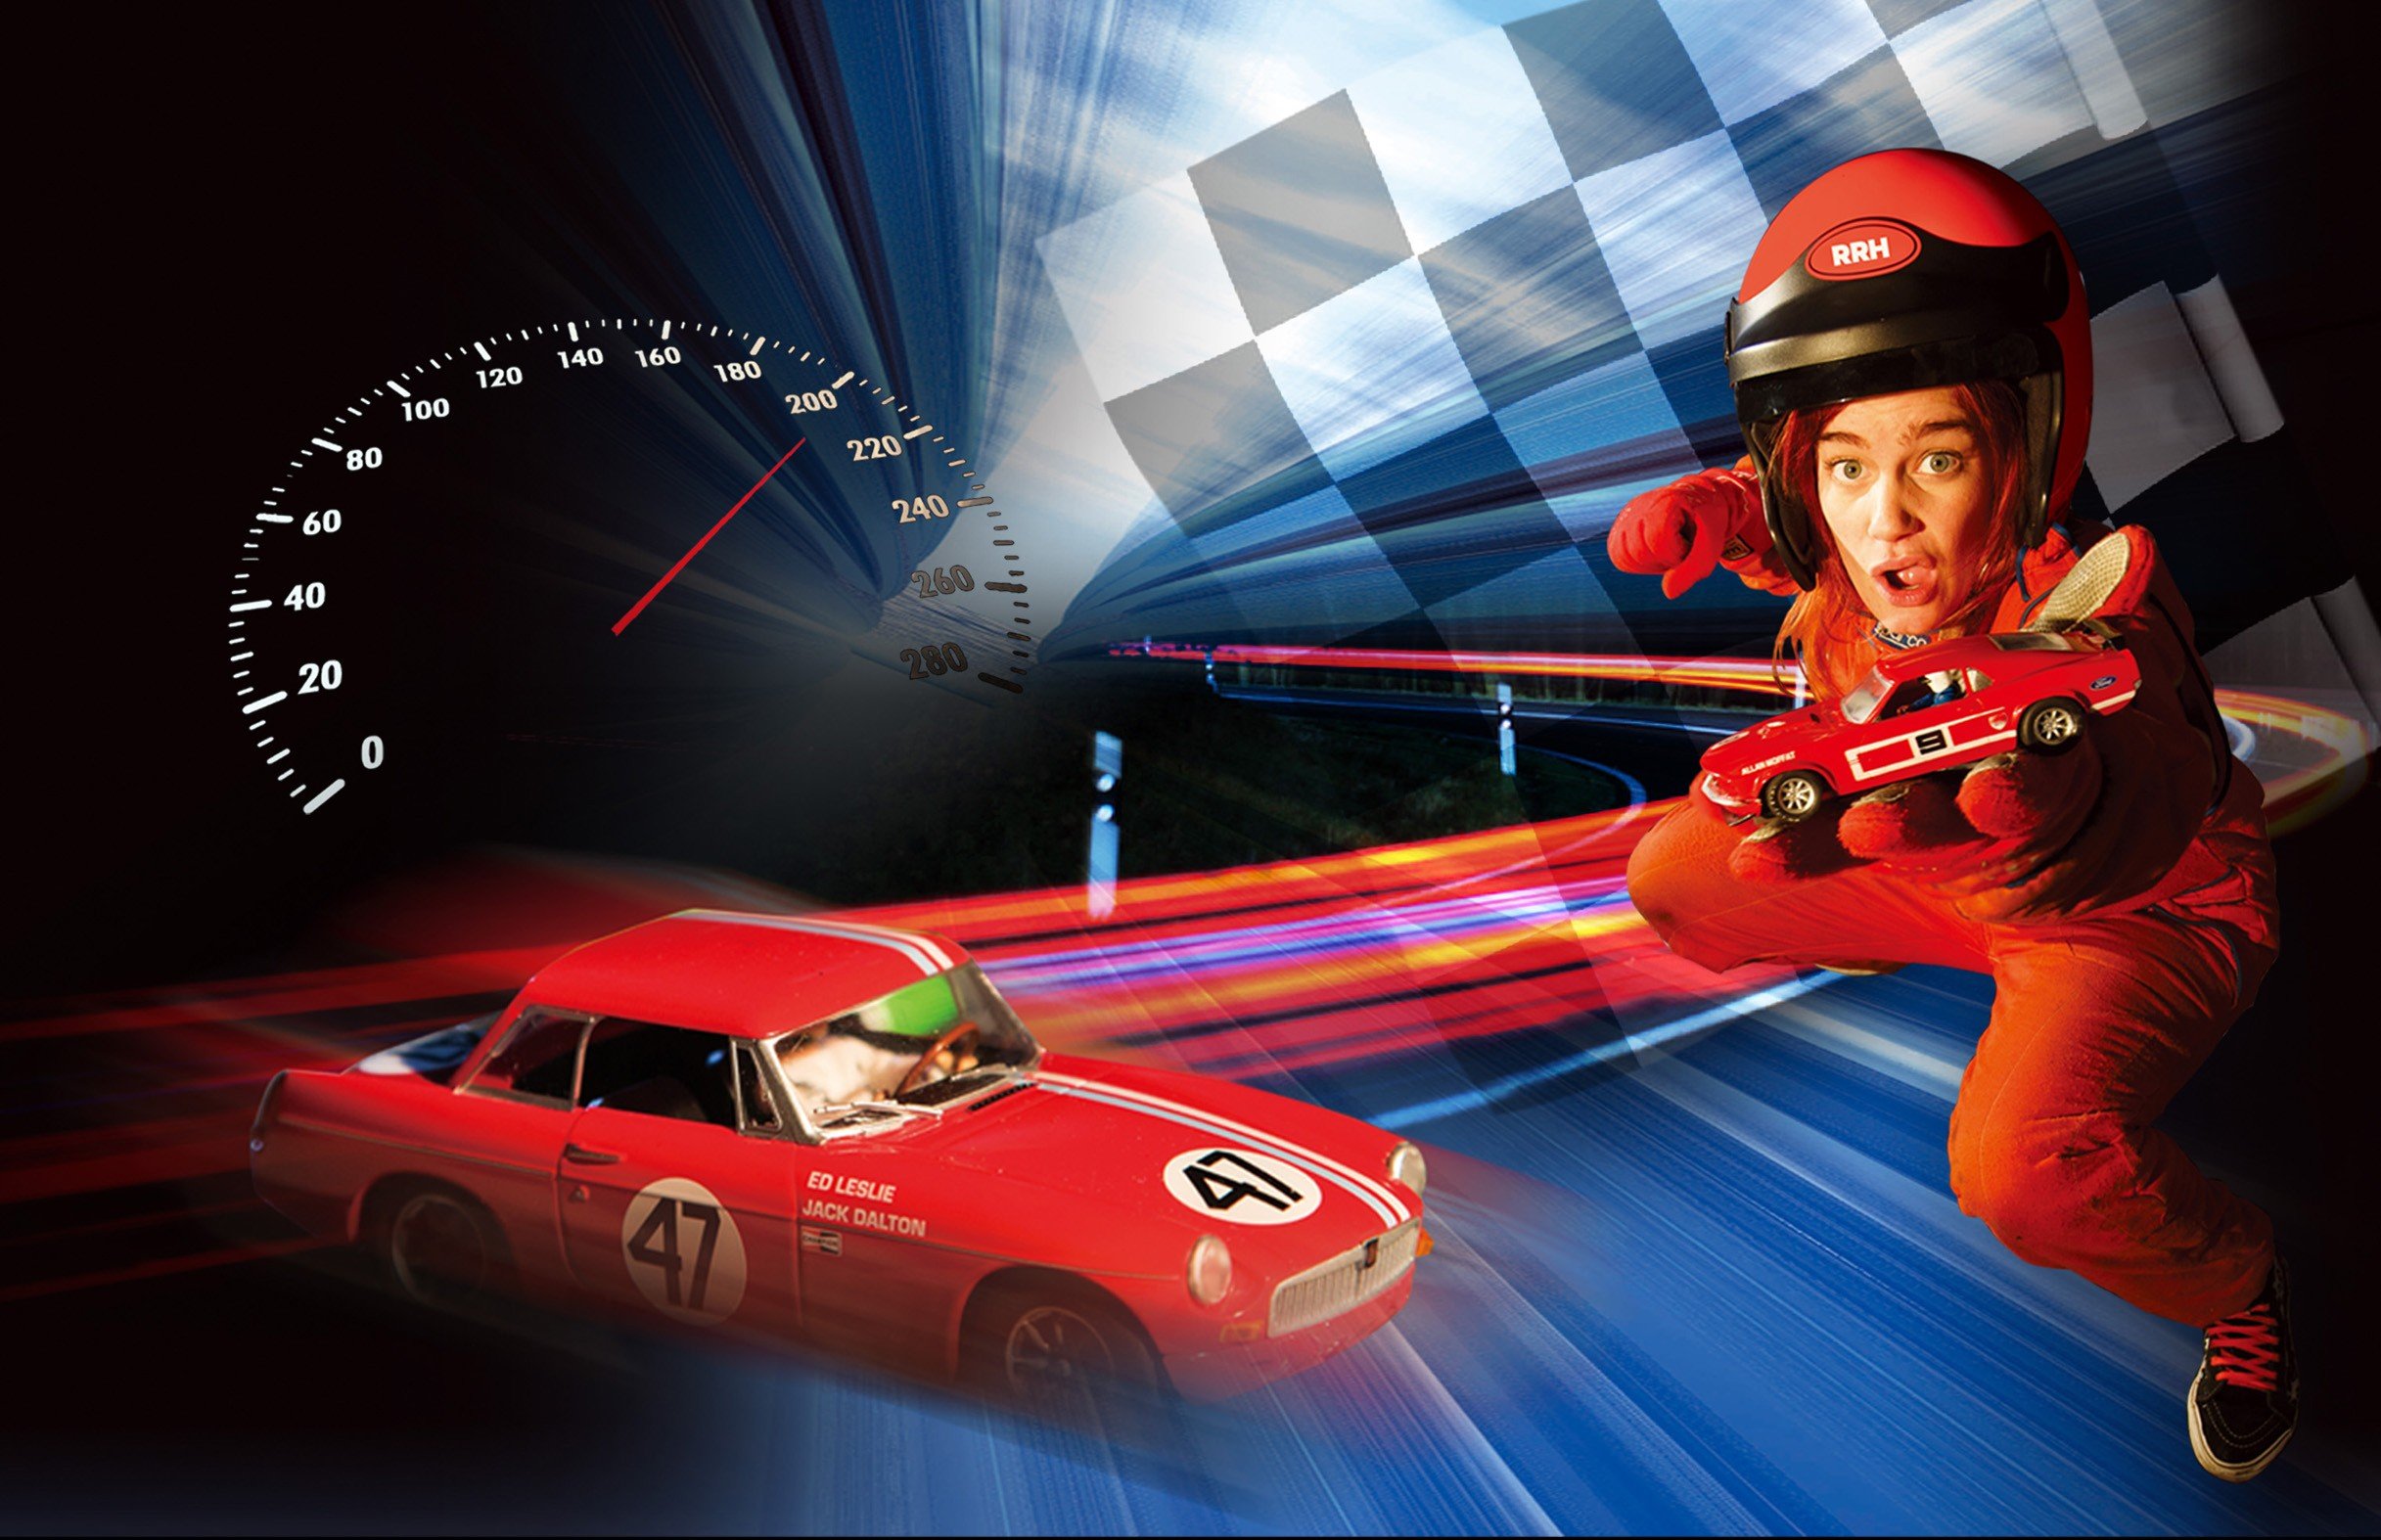 ‘Red Racing Hood’, a reimagining of the fairy tale ‘Little Red Riding Hood’ – with Red trying to overcome her fears to win a slot car race – by Australia’s Terrapin Puppet Theatre, forms part of this year’s ‘Cheers!’ Series of family entertainments in Hong Kong, which runs from November until February.